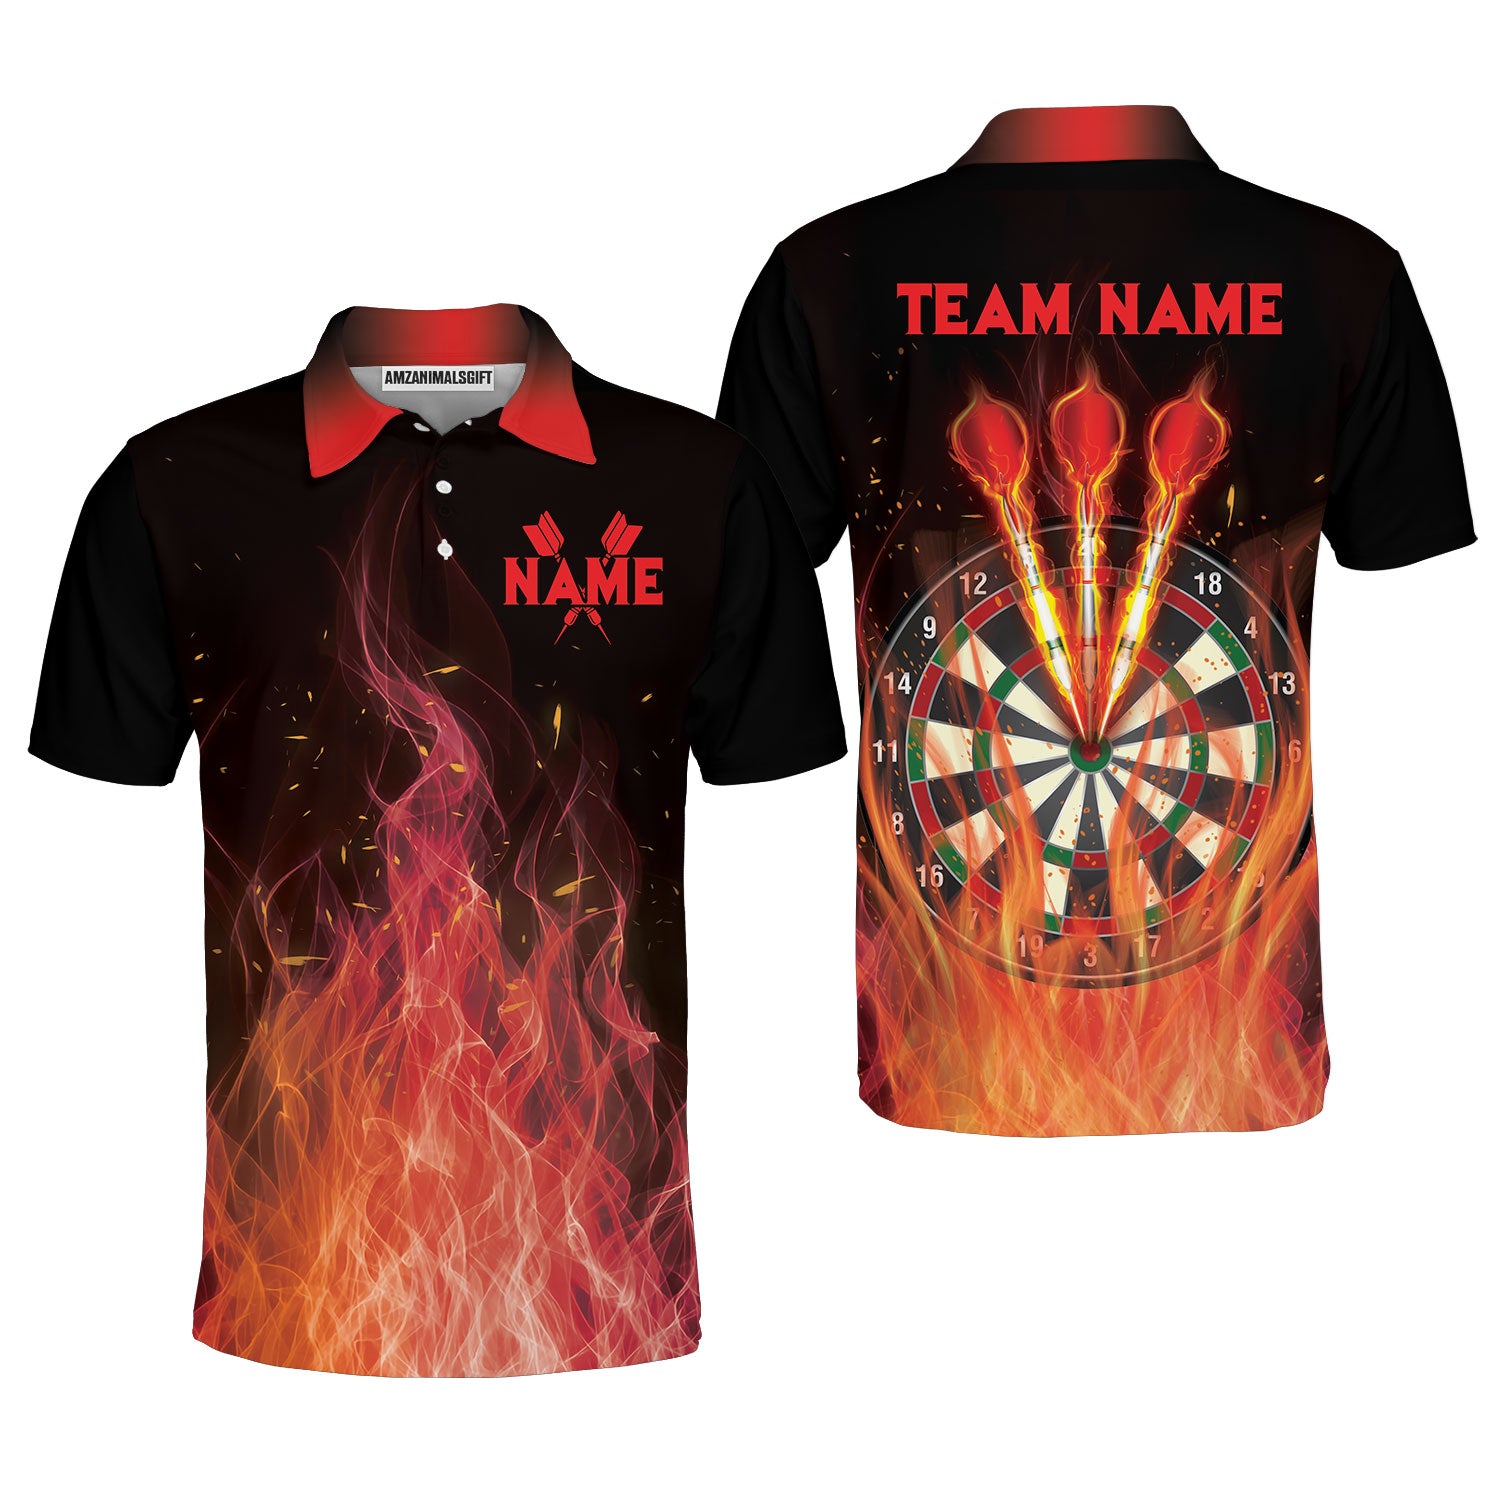 Darts Polo Shirt Custom Name And Team Name, Darts Flame Player Uniform, Personalized Shirt For Darts Lovers, Darts Players